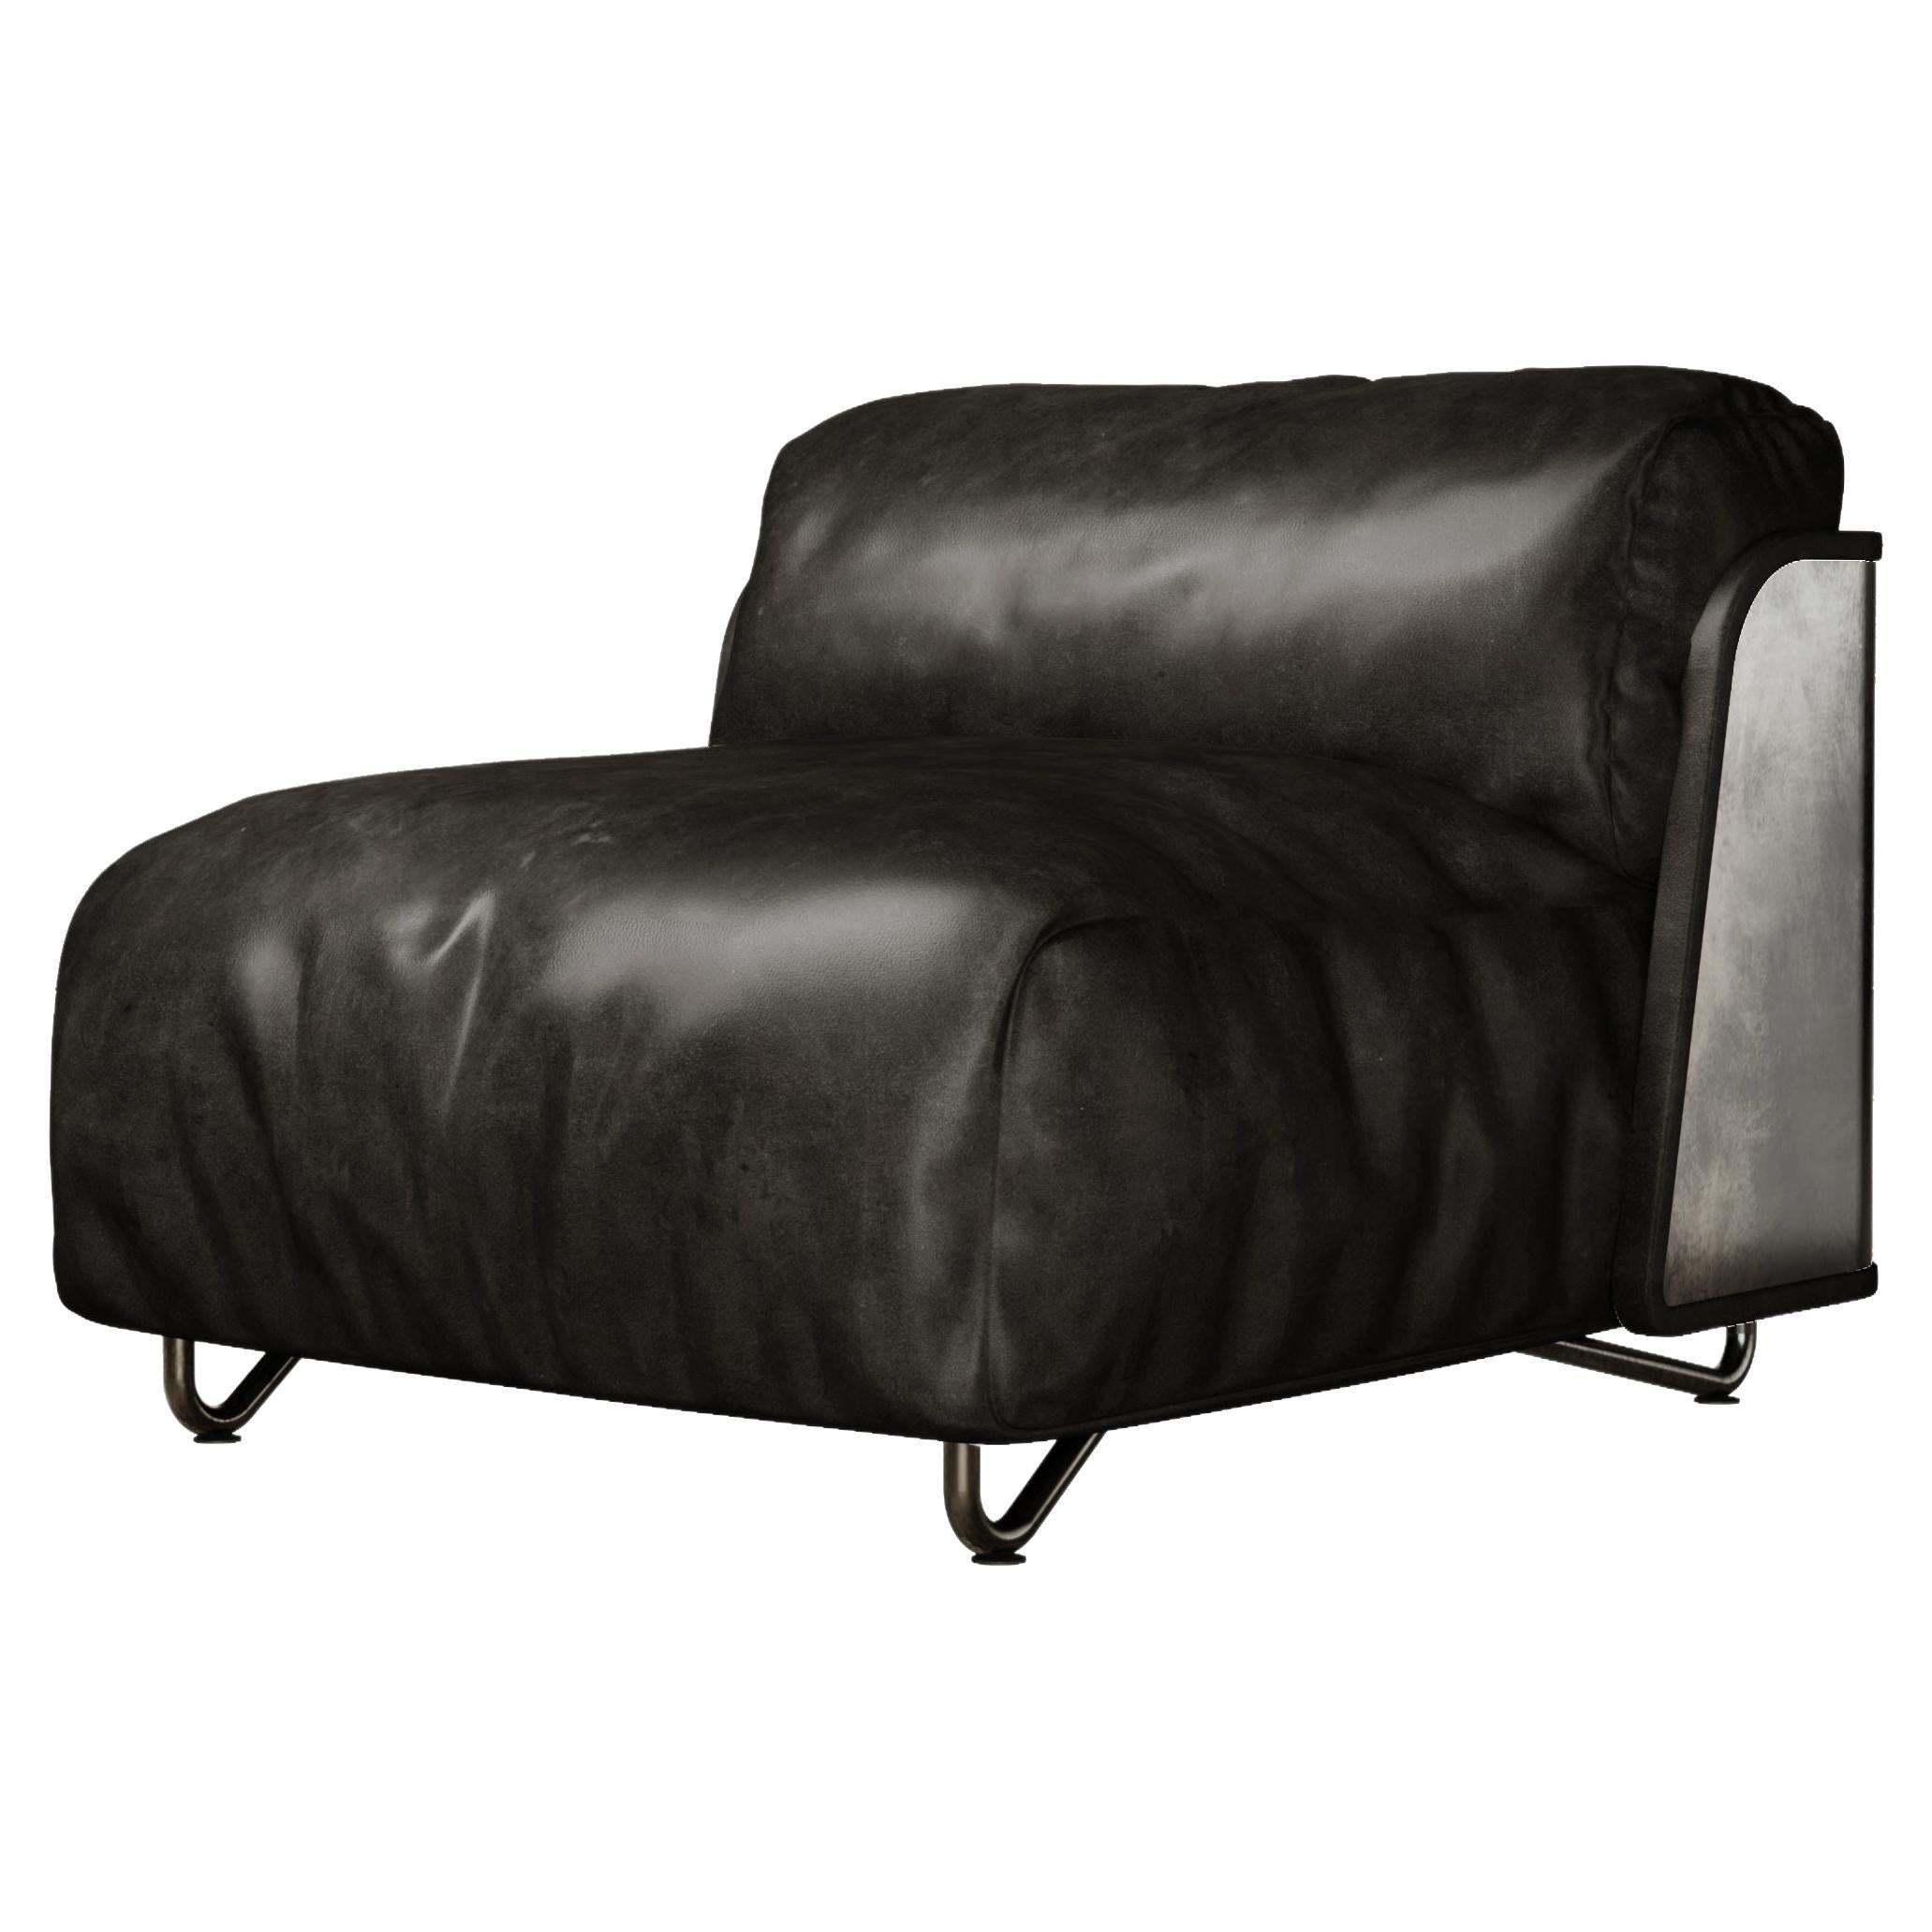 Saint-German Armchair in Black Timeless Leather and Raw Silver For Sale